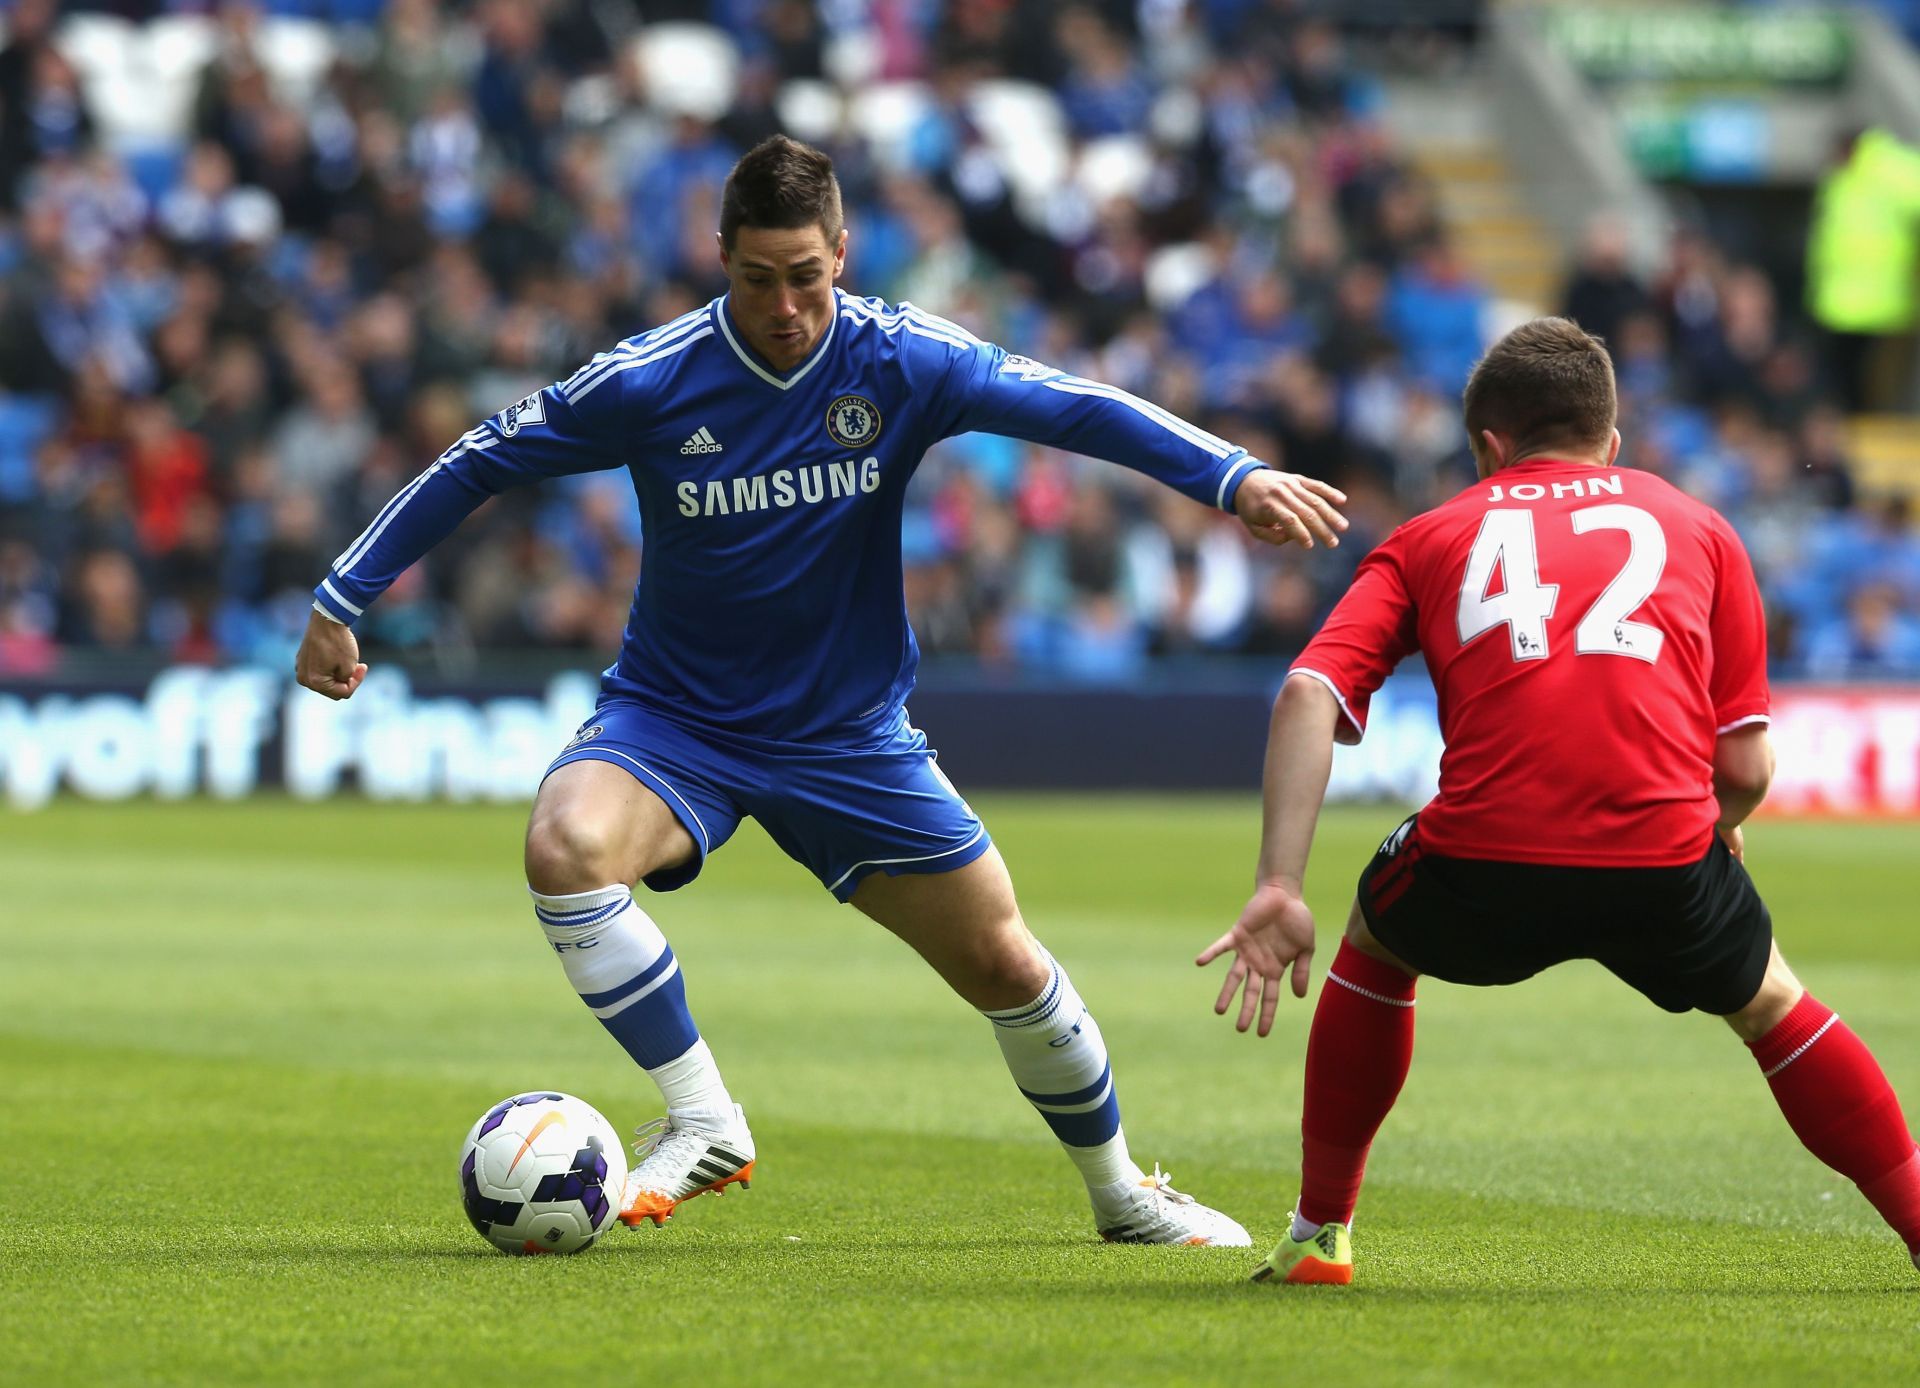 Torres playing against Cardiff City - Premier League